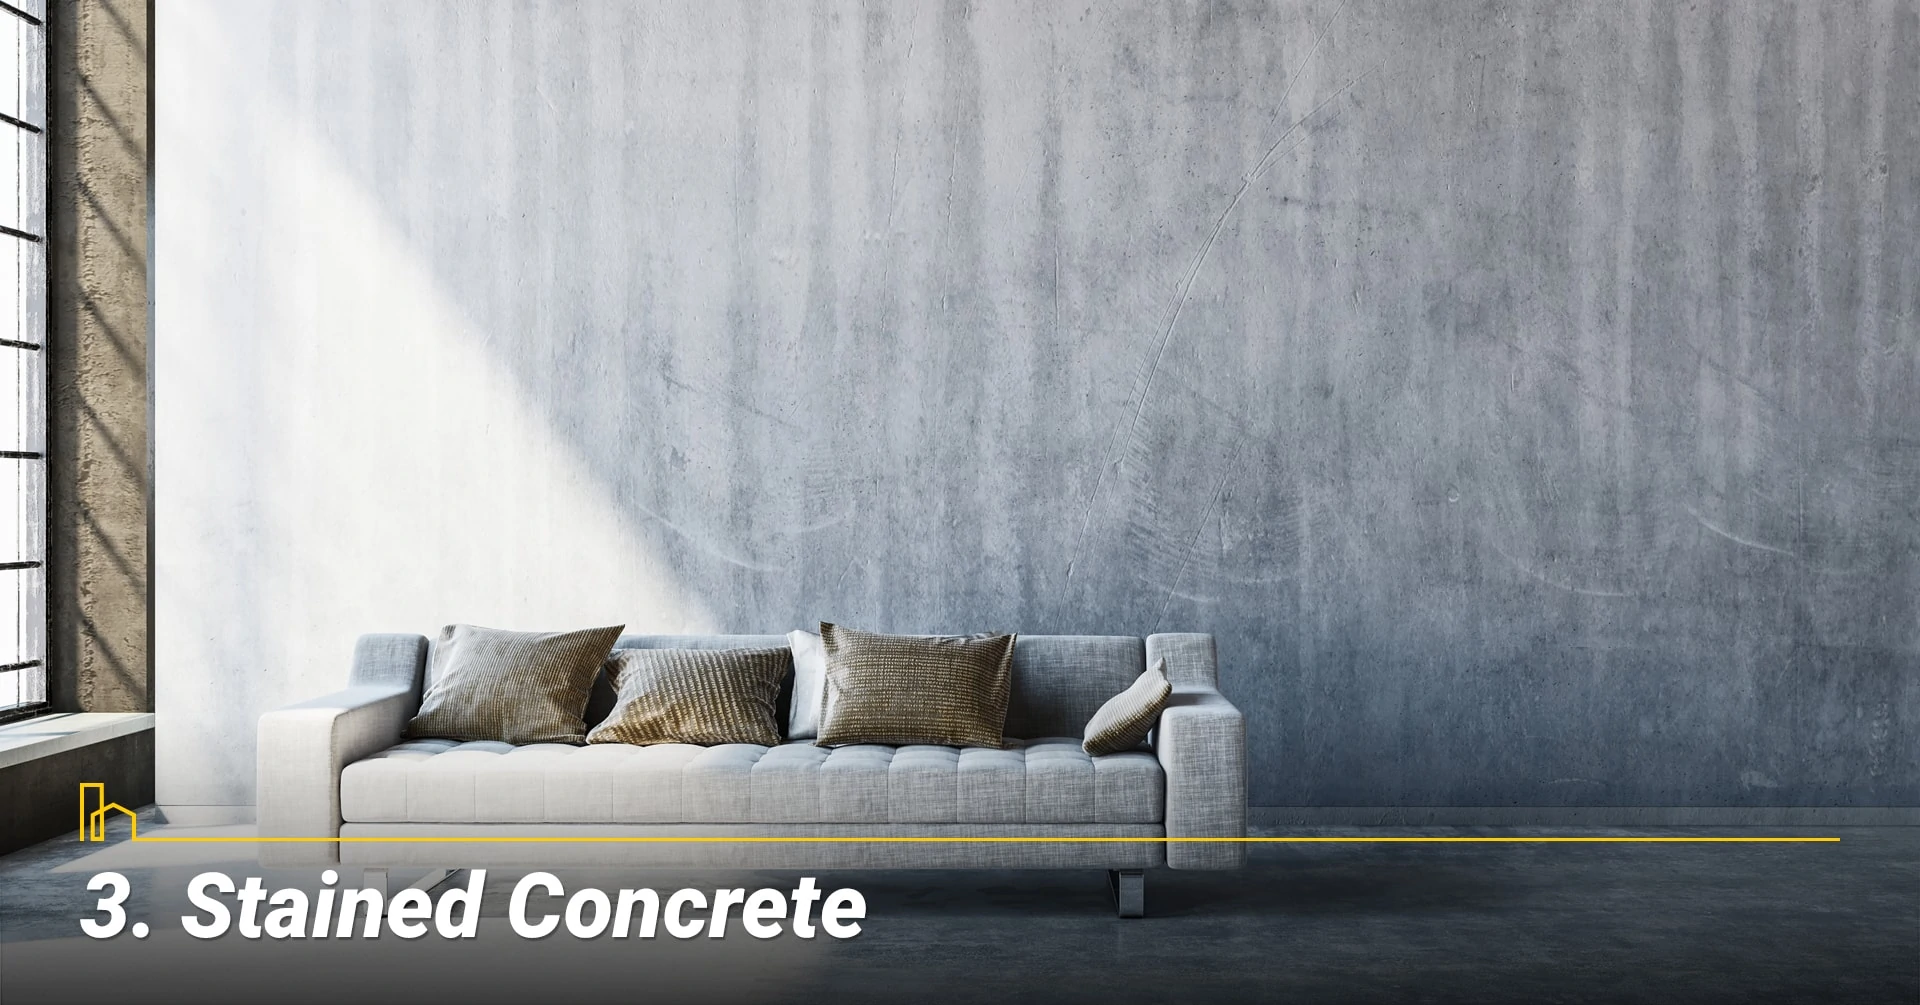 Stained Concrete, cover your floor with concrete